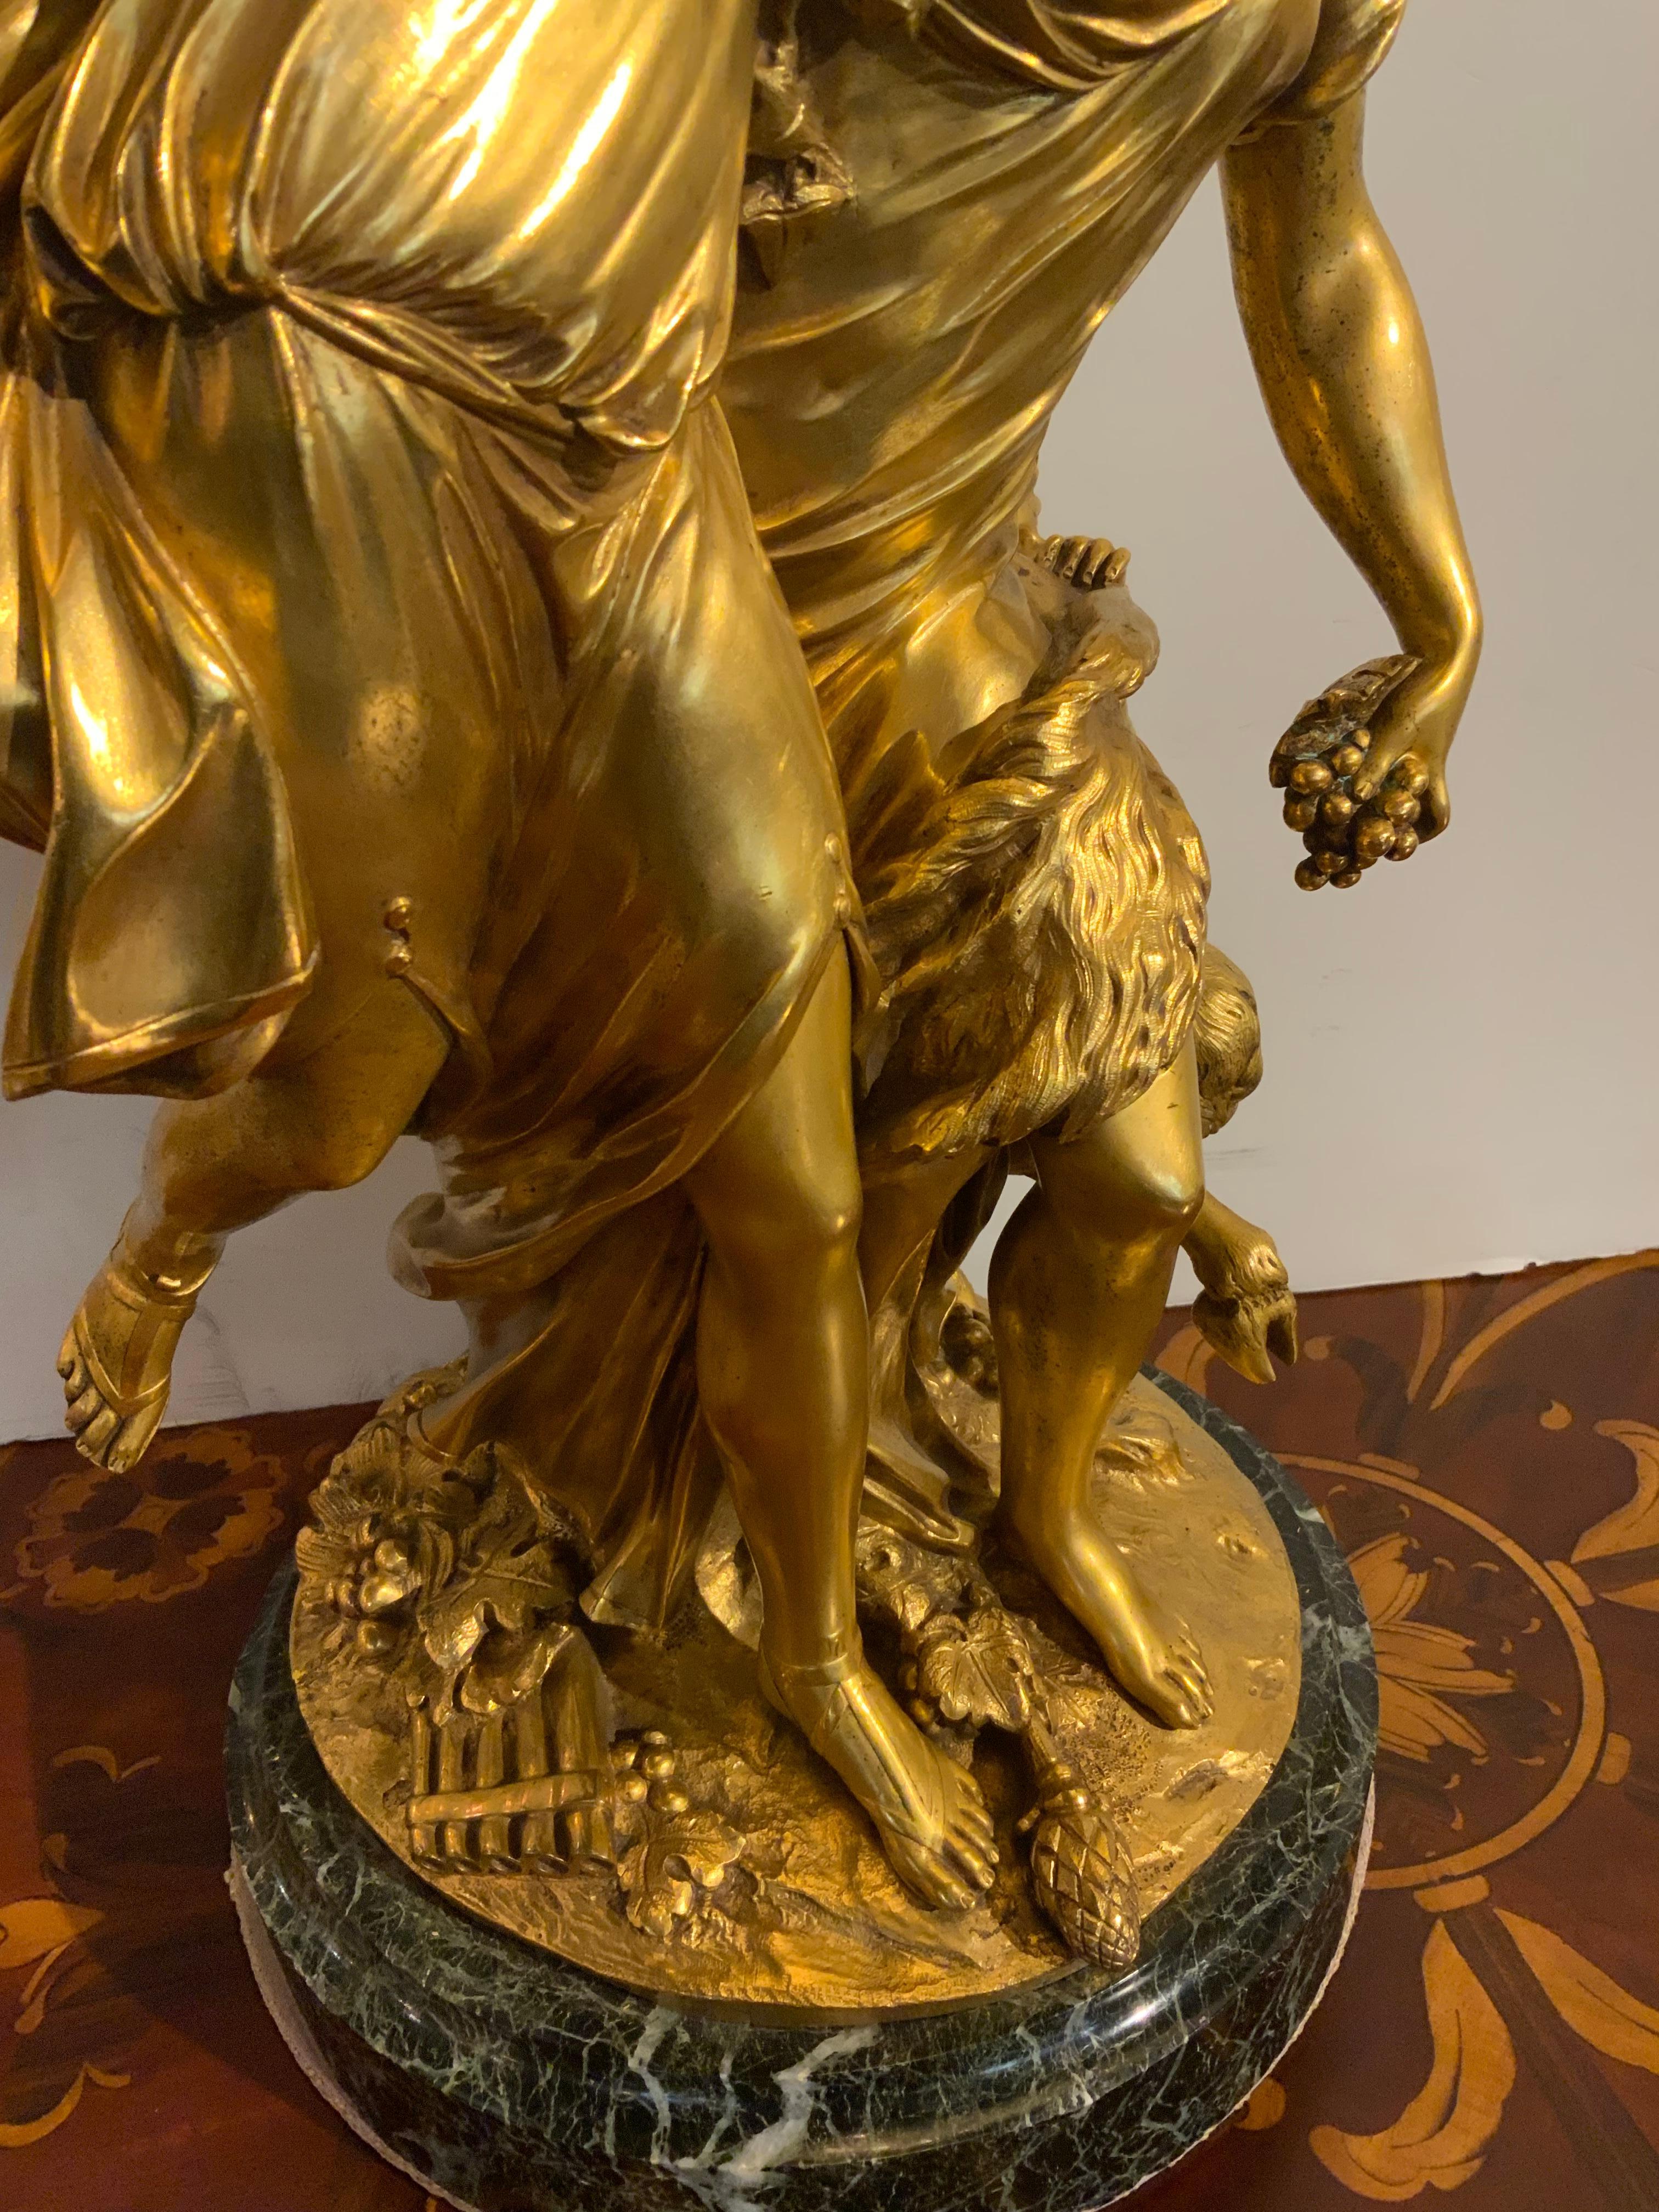 19th Century Gilt Bronze Statue After Claude Michel Clodion, French Sculptor, 1738-1814